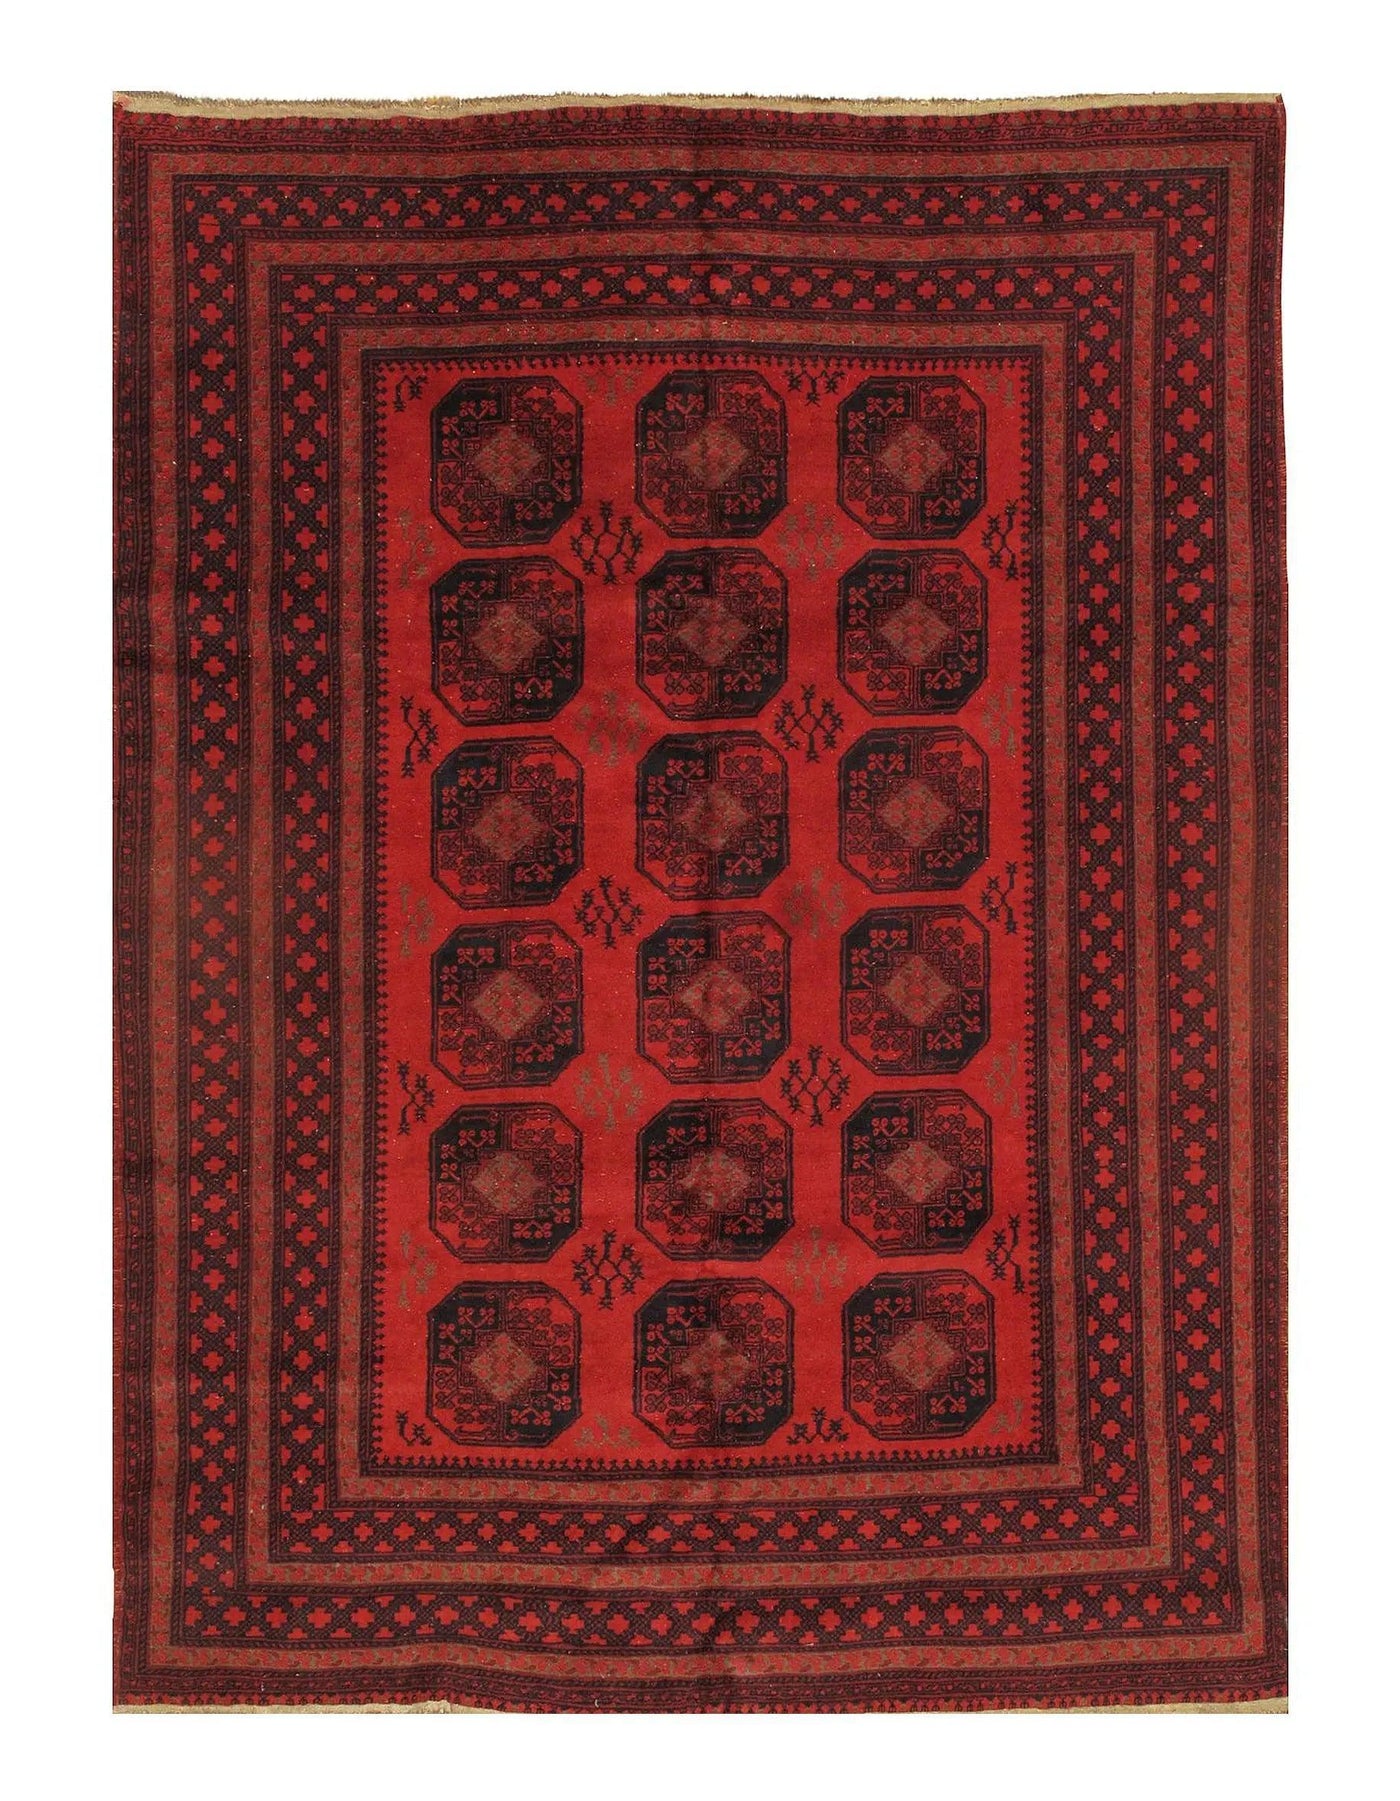 Red Antique Yamoud wool Rug - 6'6" X 9'